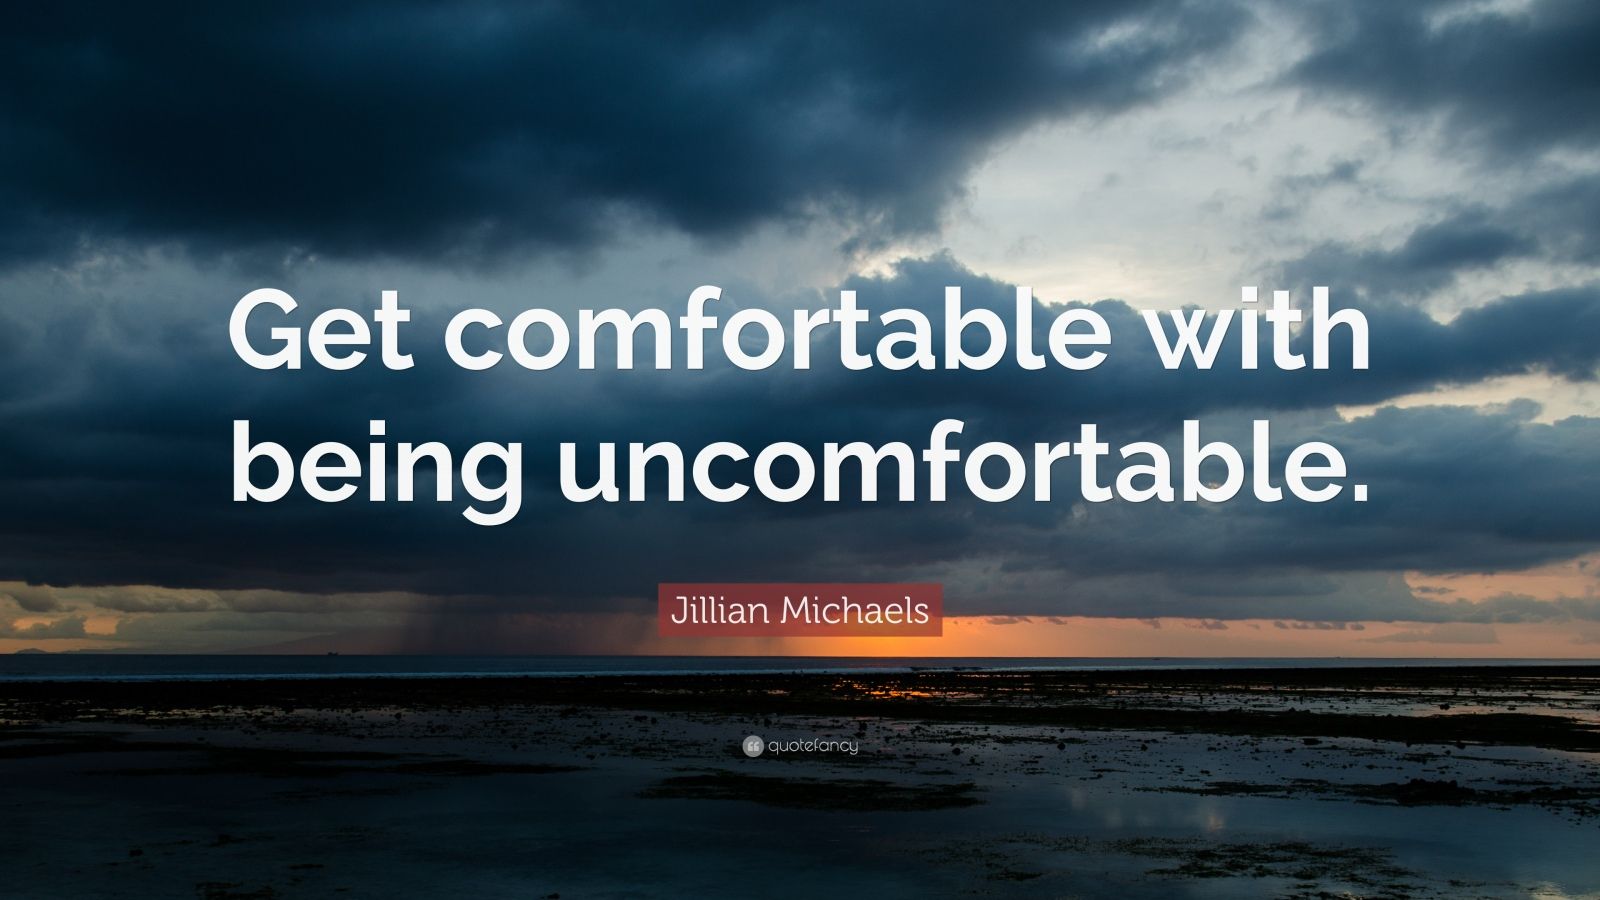 Jillian Michaels Quote: “Get comfortable with being uncomfortable.” (22